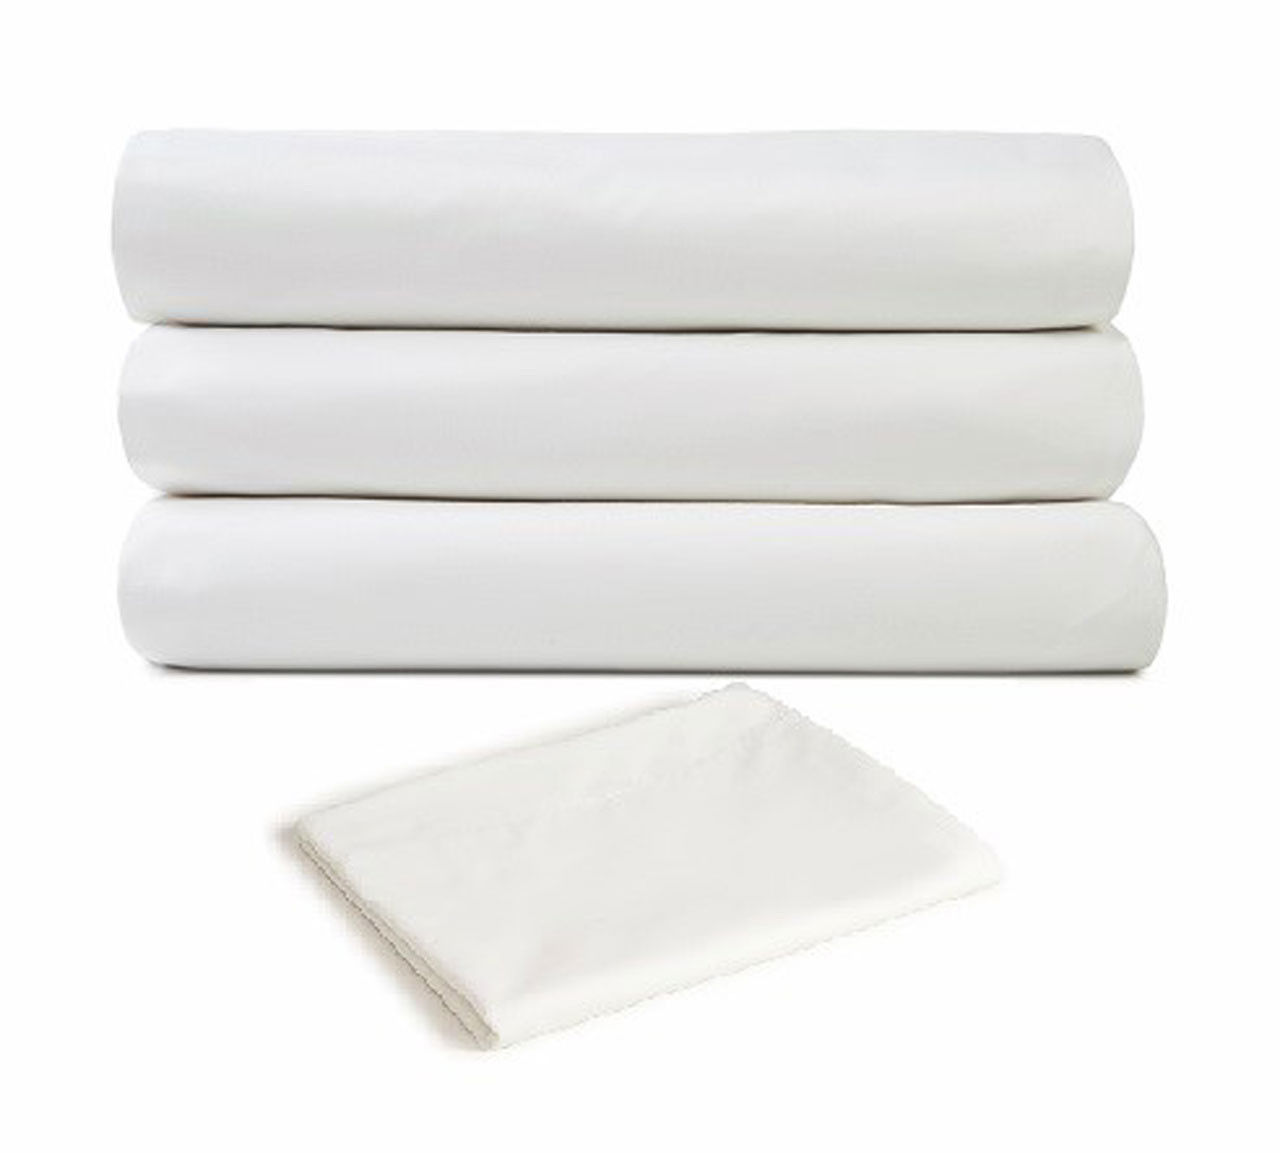 Do 60/40 cotton poly blend sheets like the T310 Premium Bed Sheets shrink?